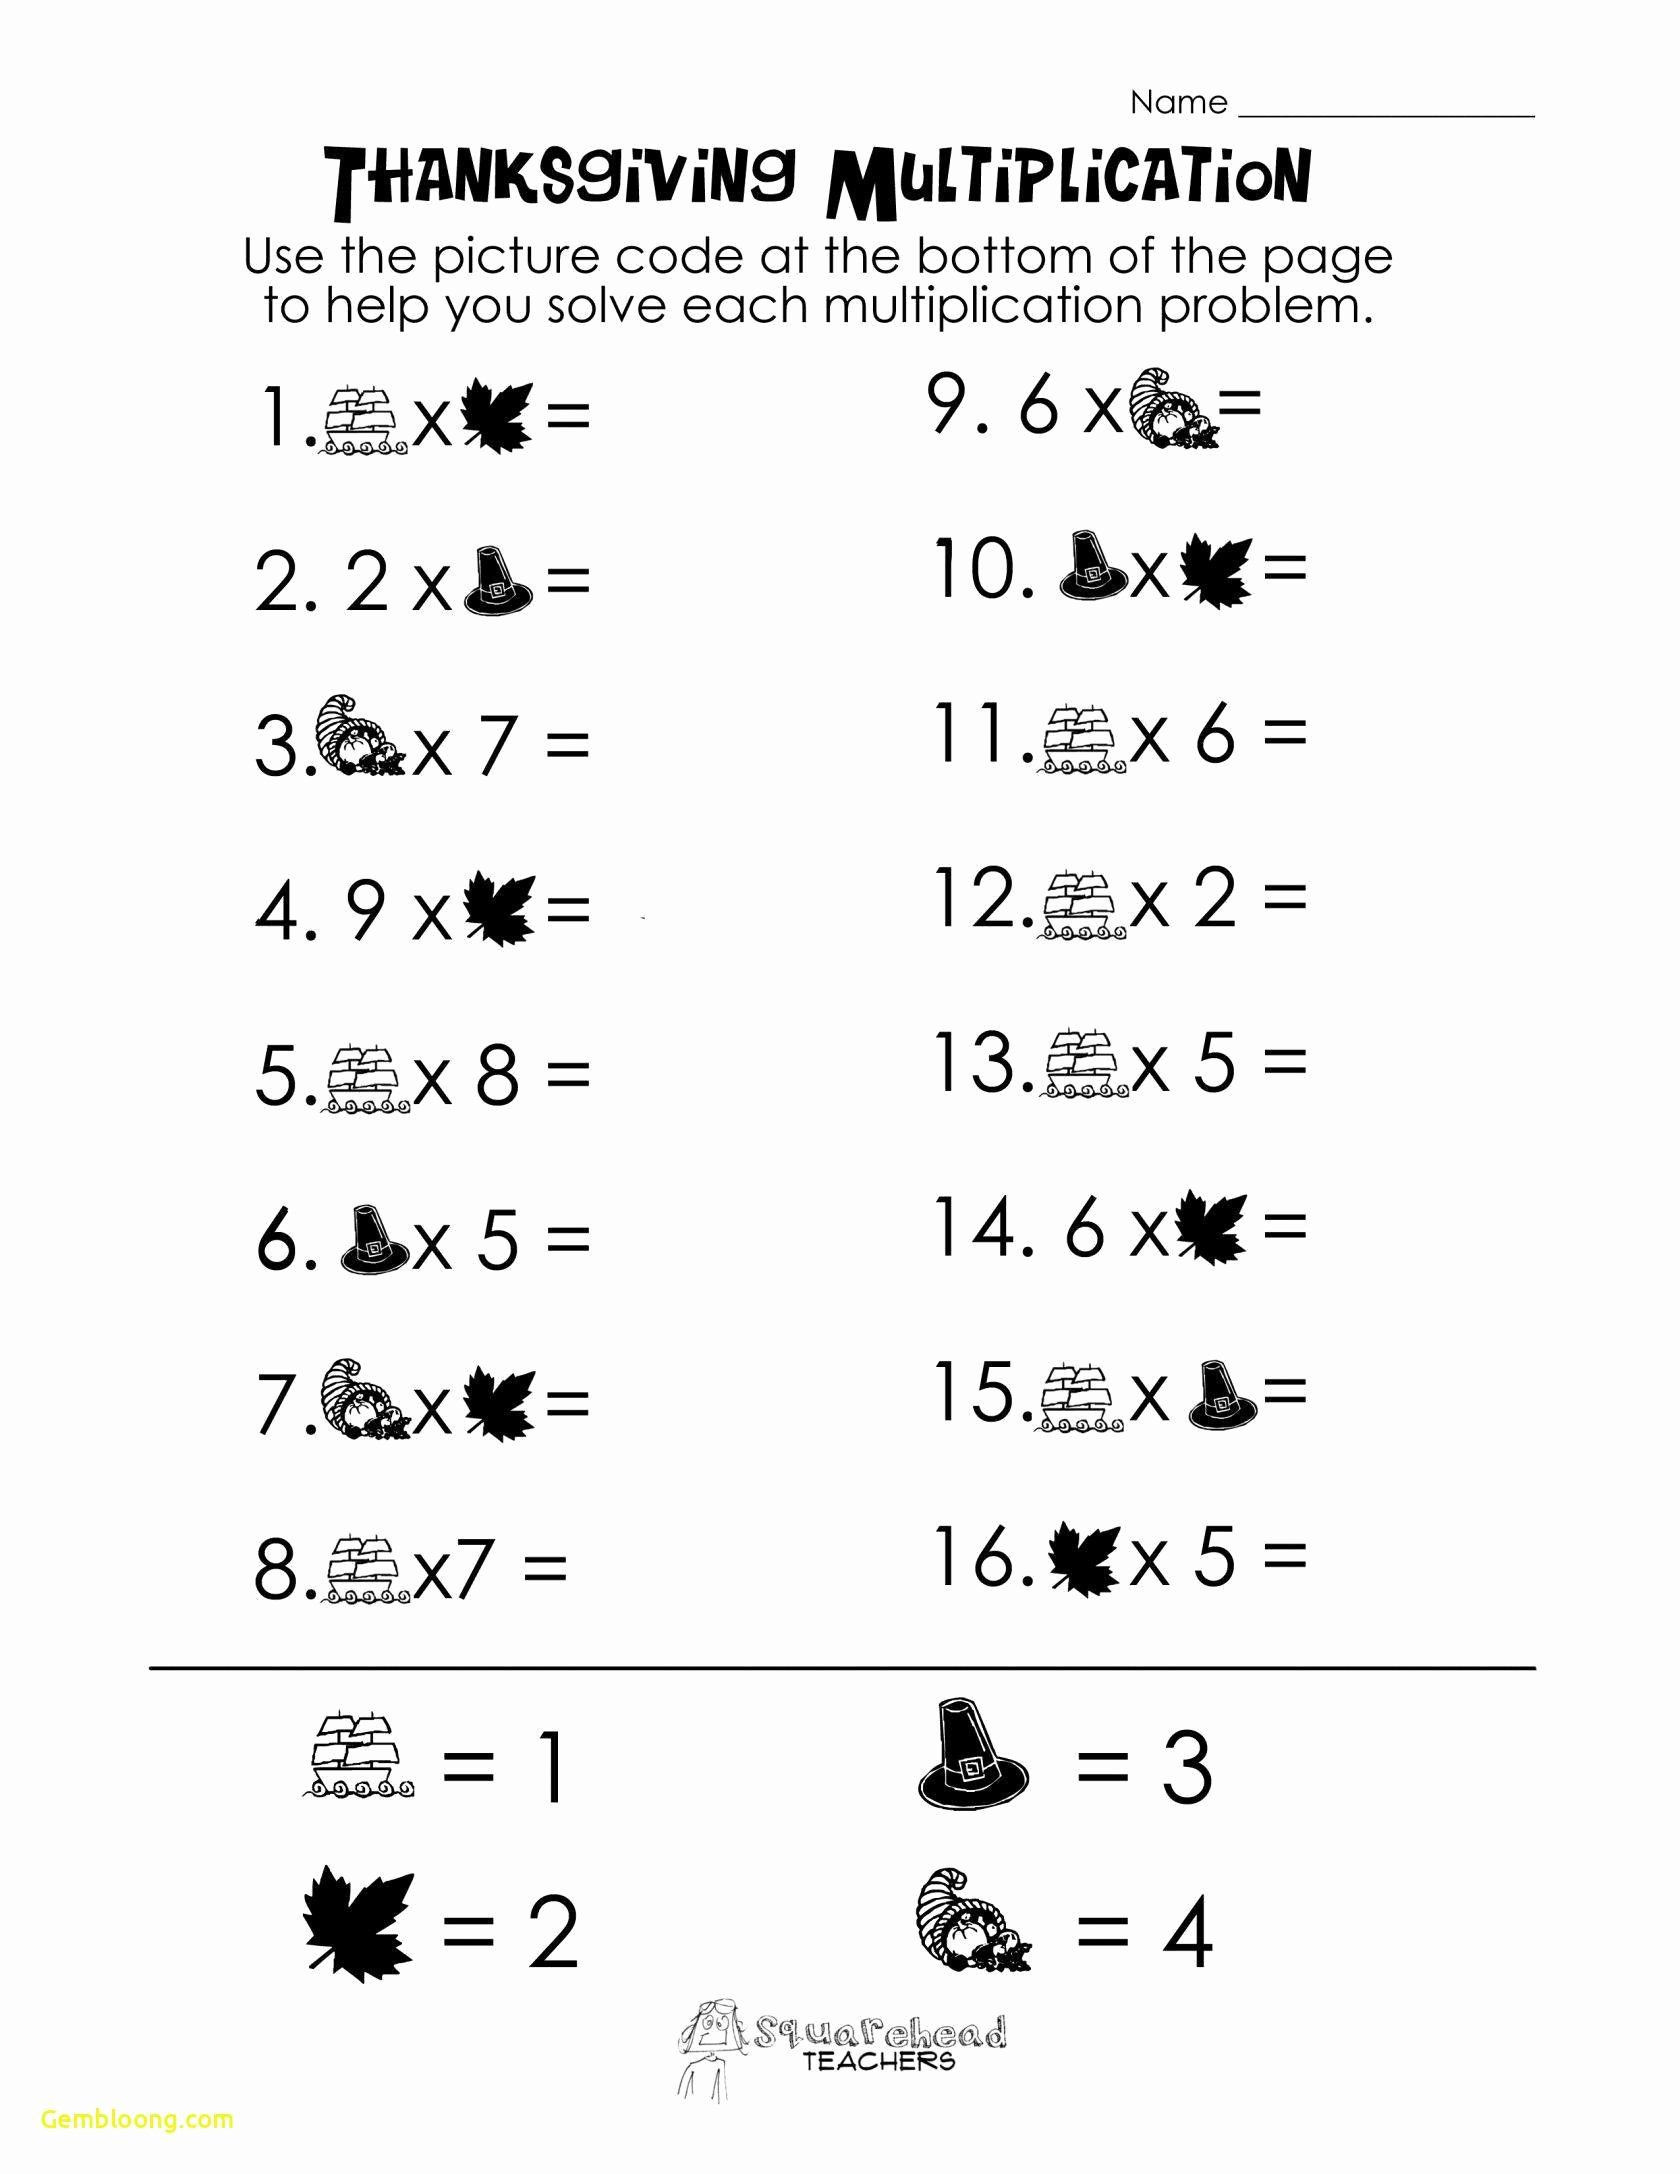 Geometric Sequences Worksheet Answers 50 Geometric Sequences Worksheet Answers In 2020 with